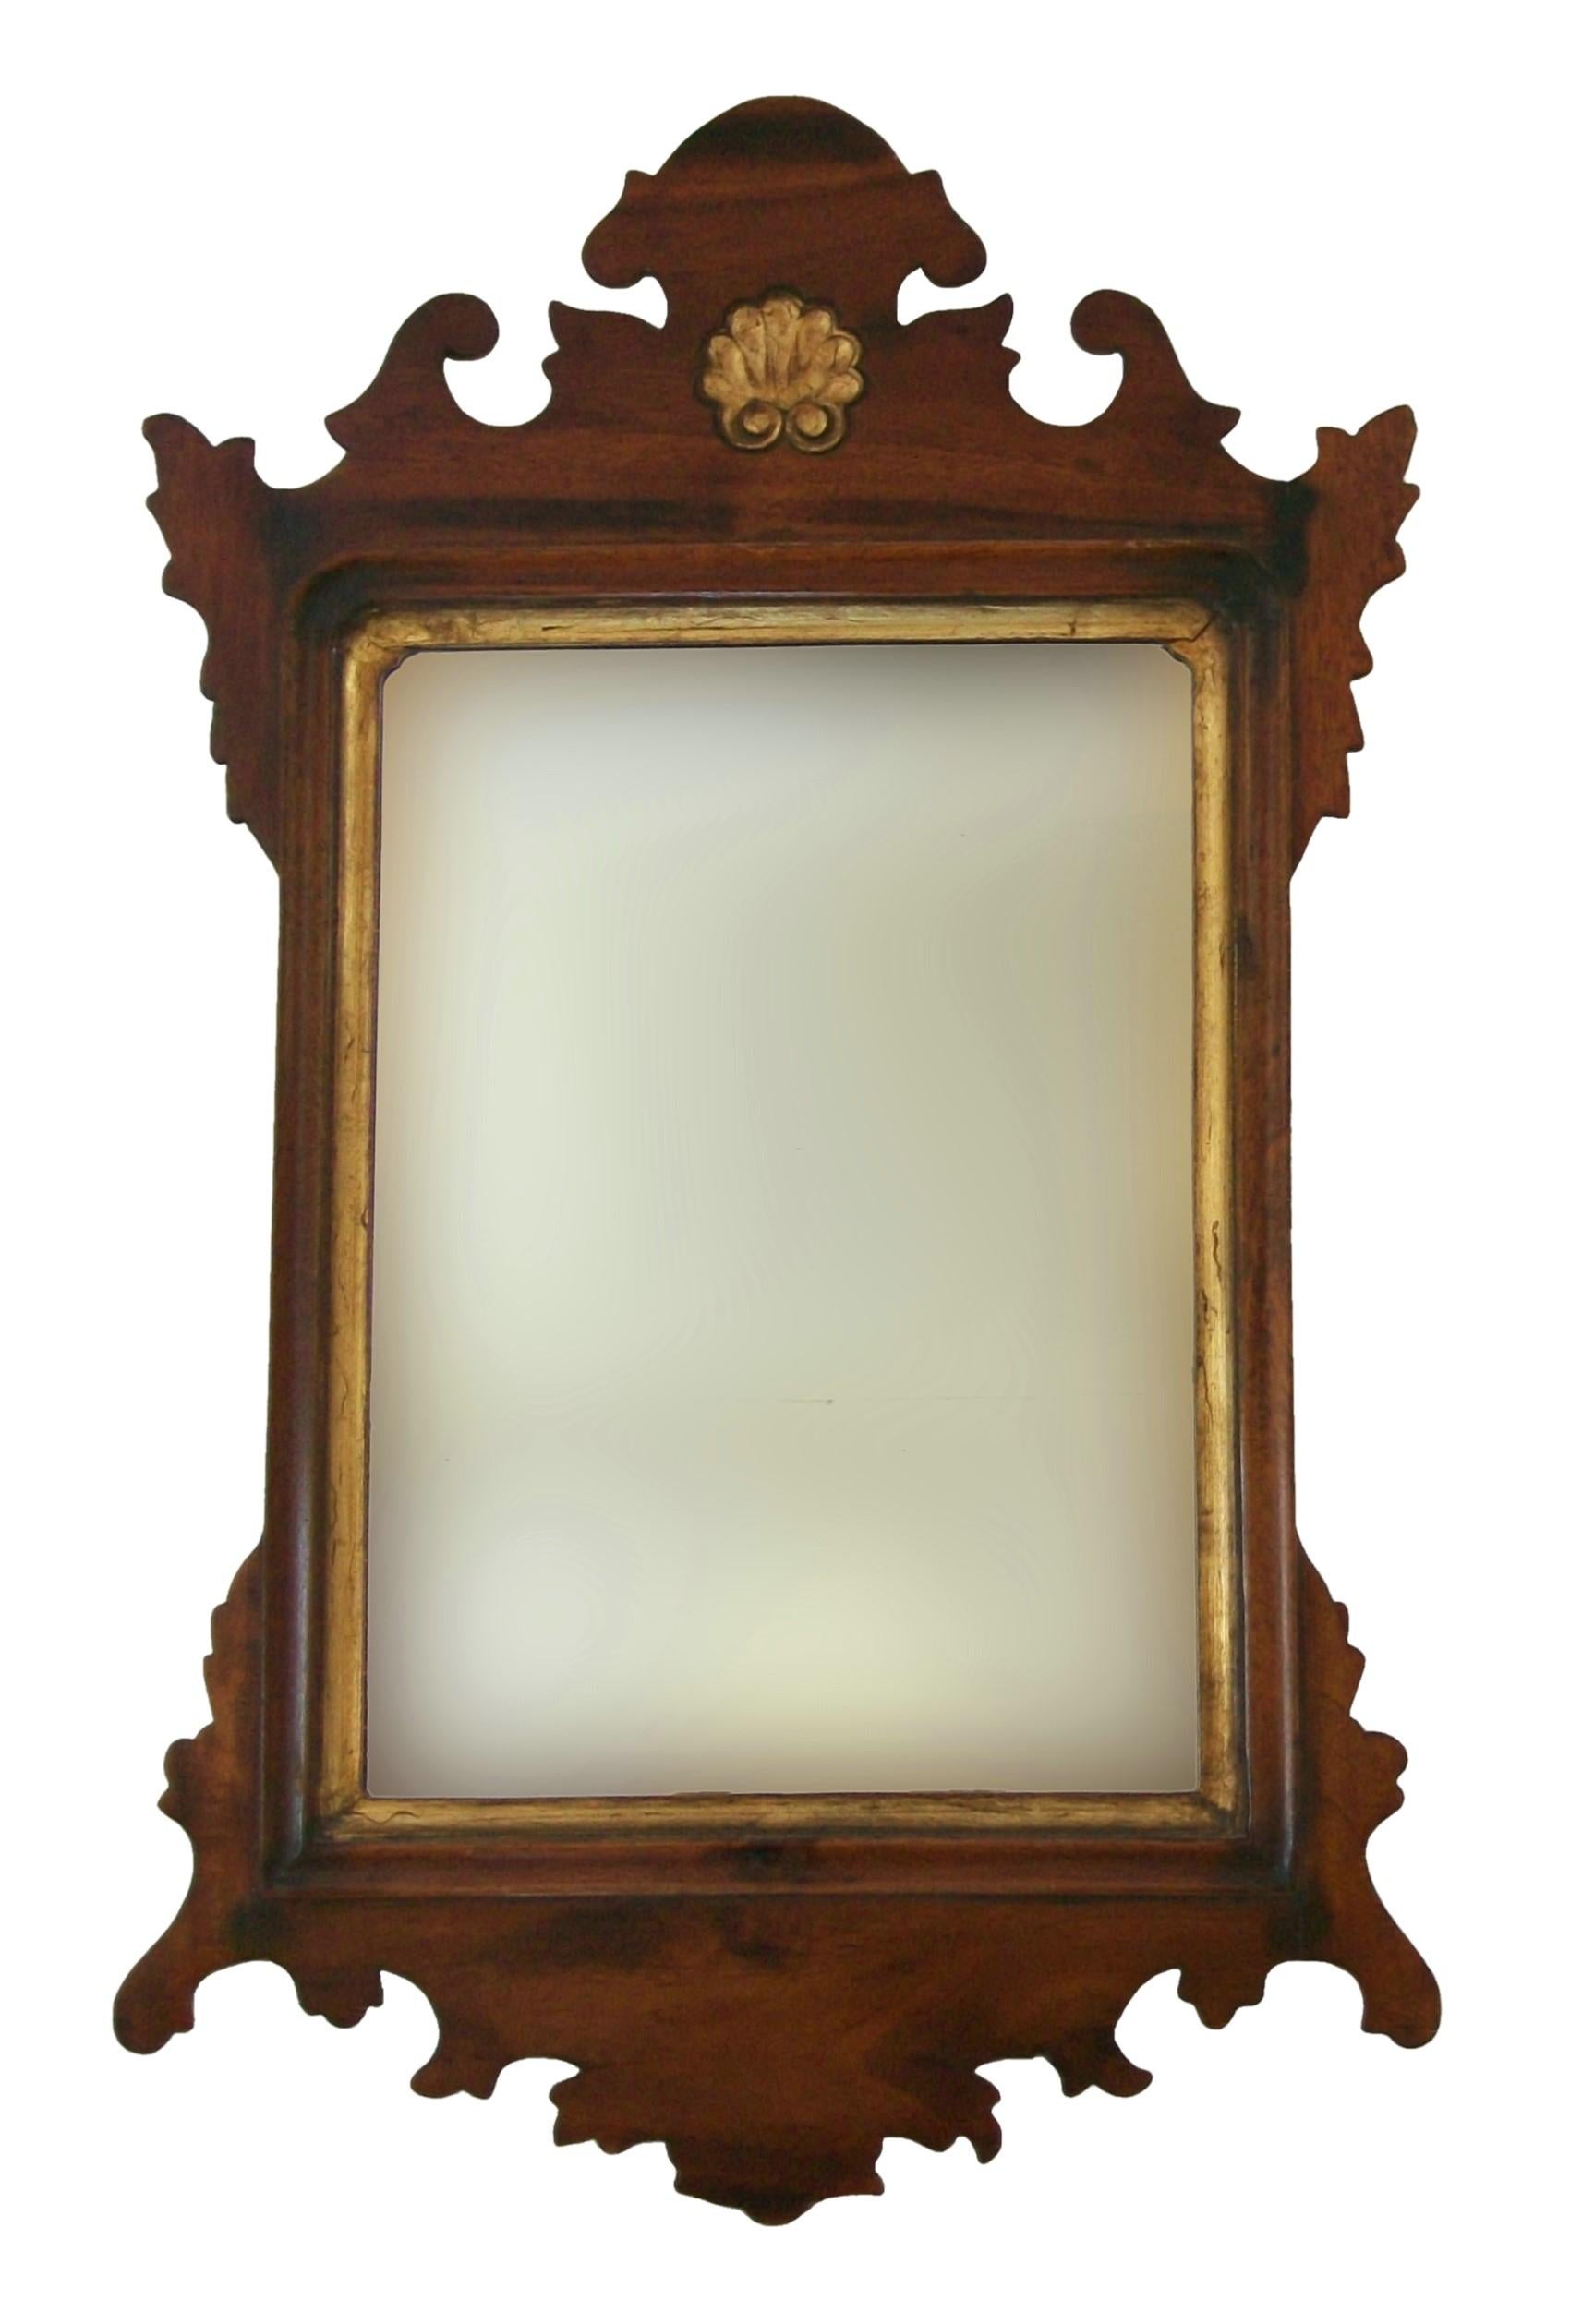 Fine flamed mahogany and parcel gilt diminutive Chippendale style mirror - exceptional quality and warm patina - featuring solid hand carved flamed mahogany panels to the top and bottom (see rear detail photos) - hand carved gilt decorated shell and